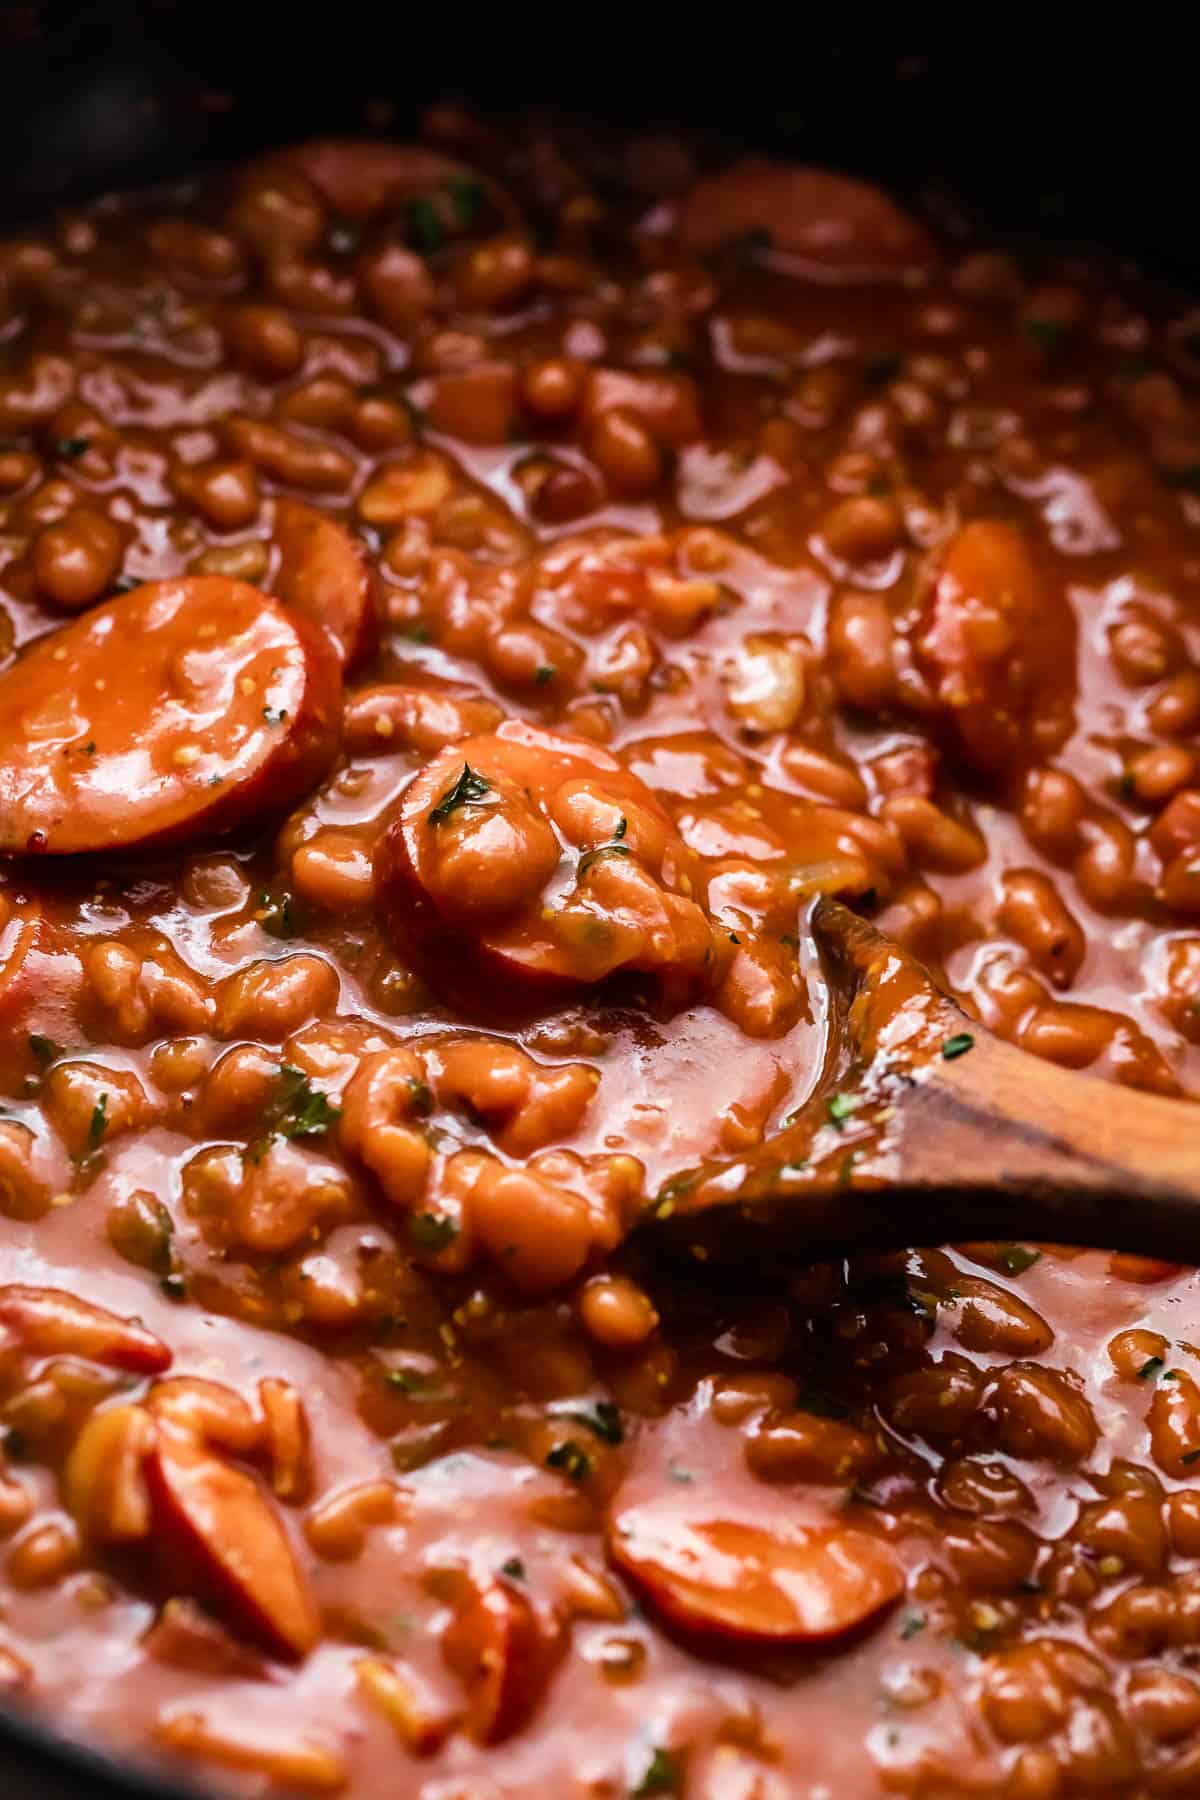 side shot of wooden spoon stirring through baked beans and sausage.